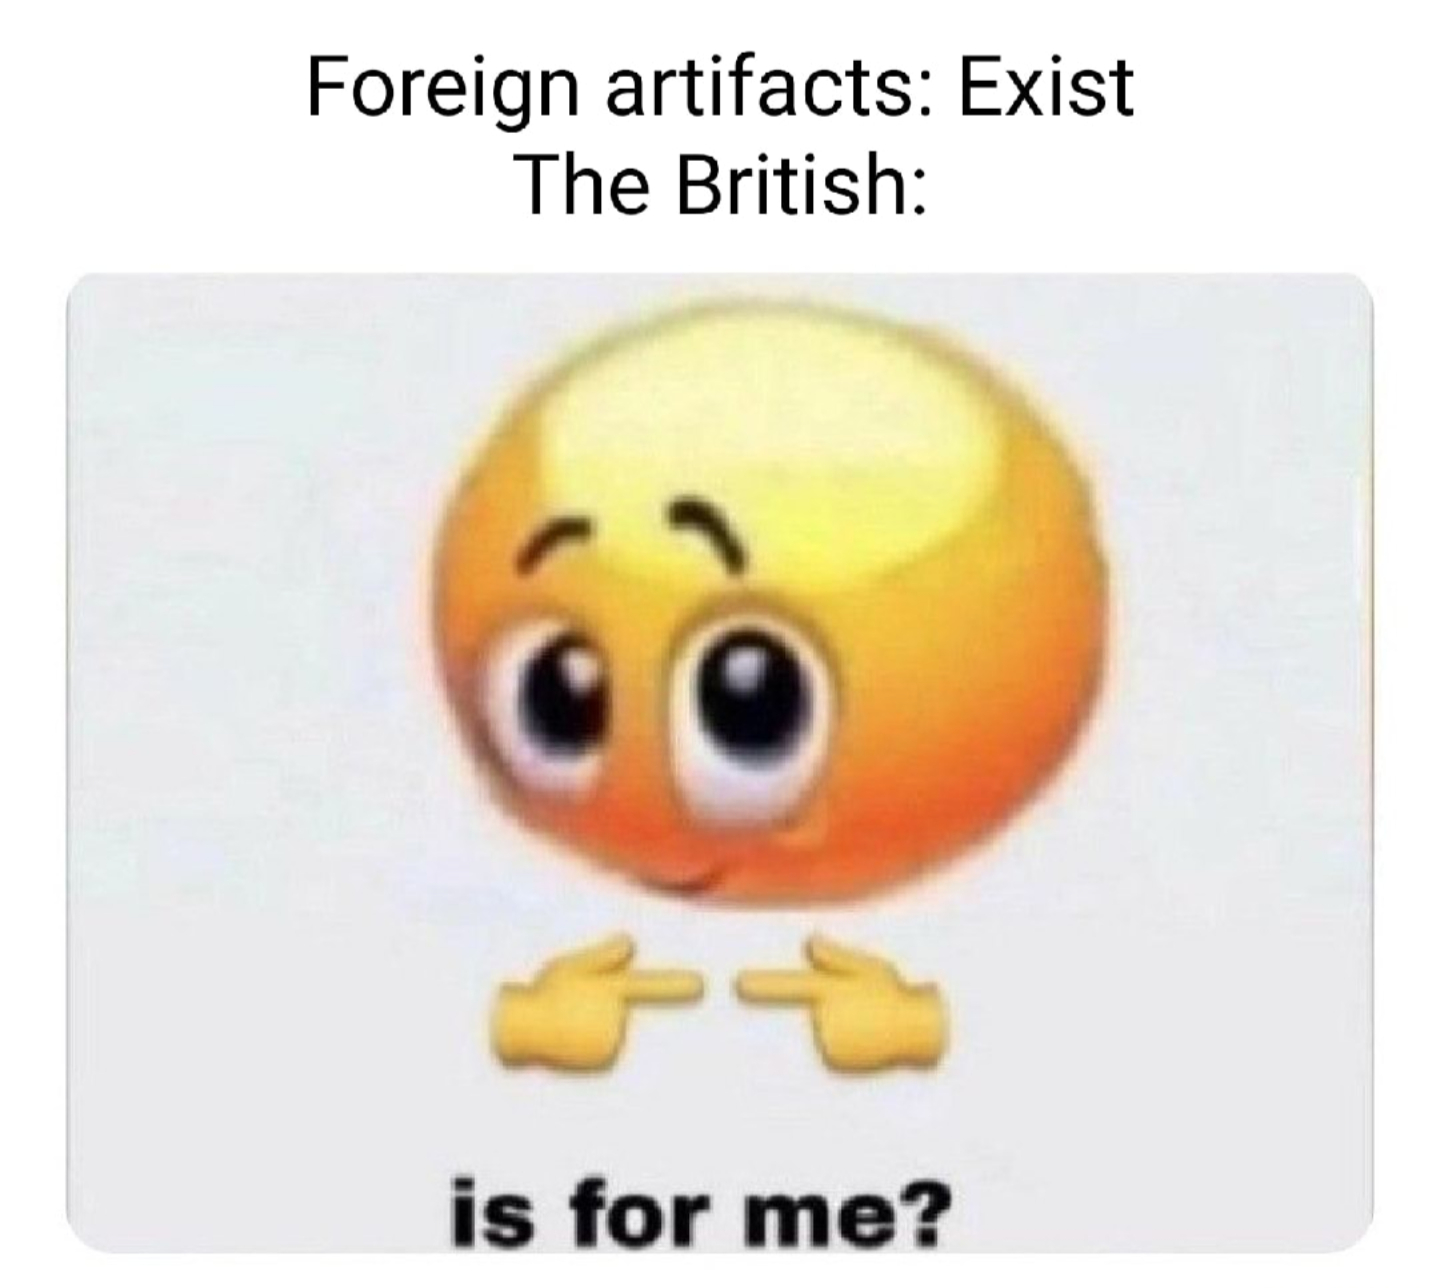 lysosome meme - Foreign artifacts Exist The British 3 is for me?